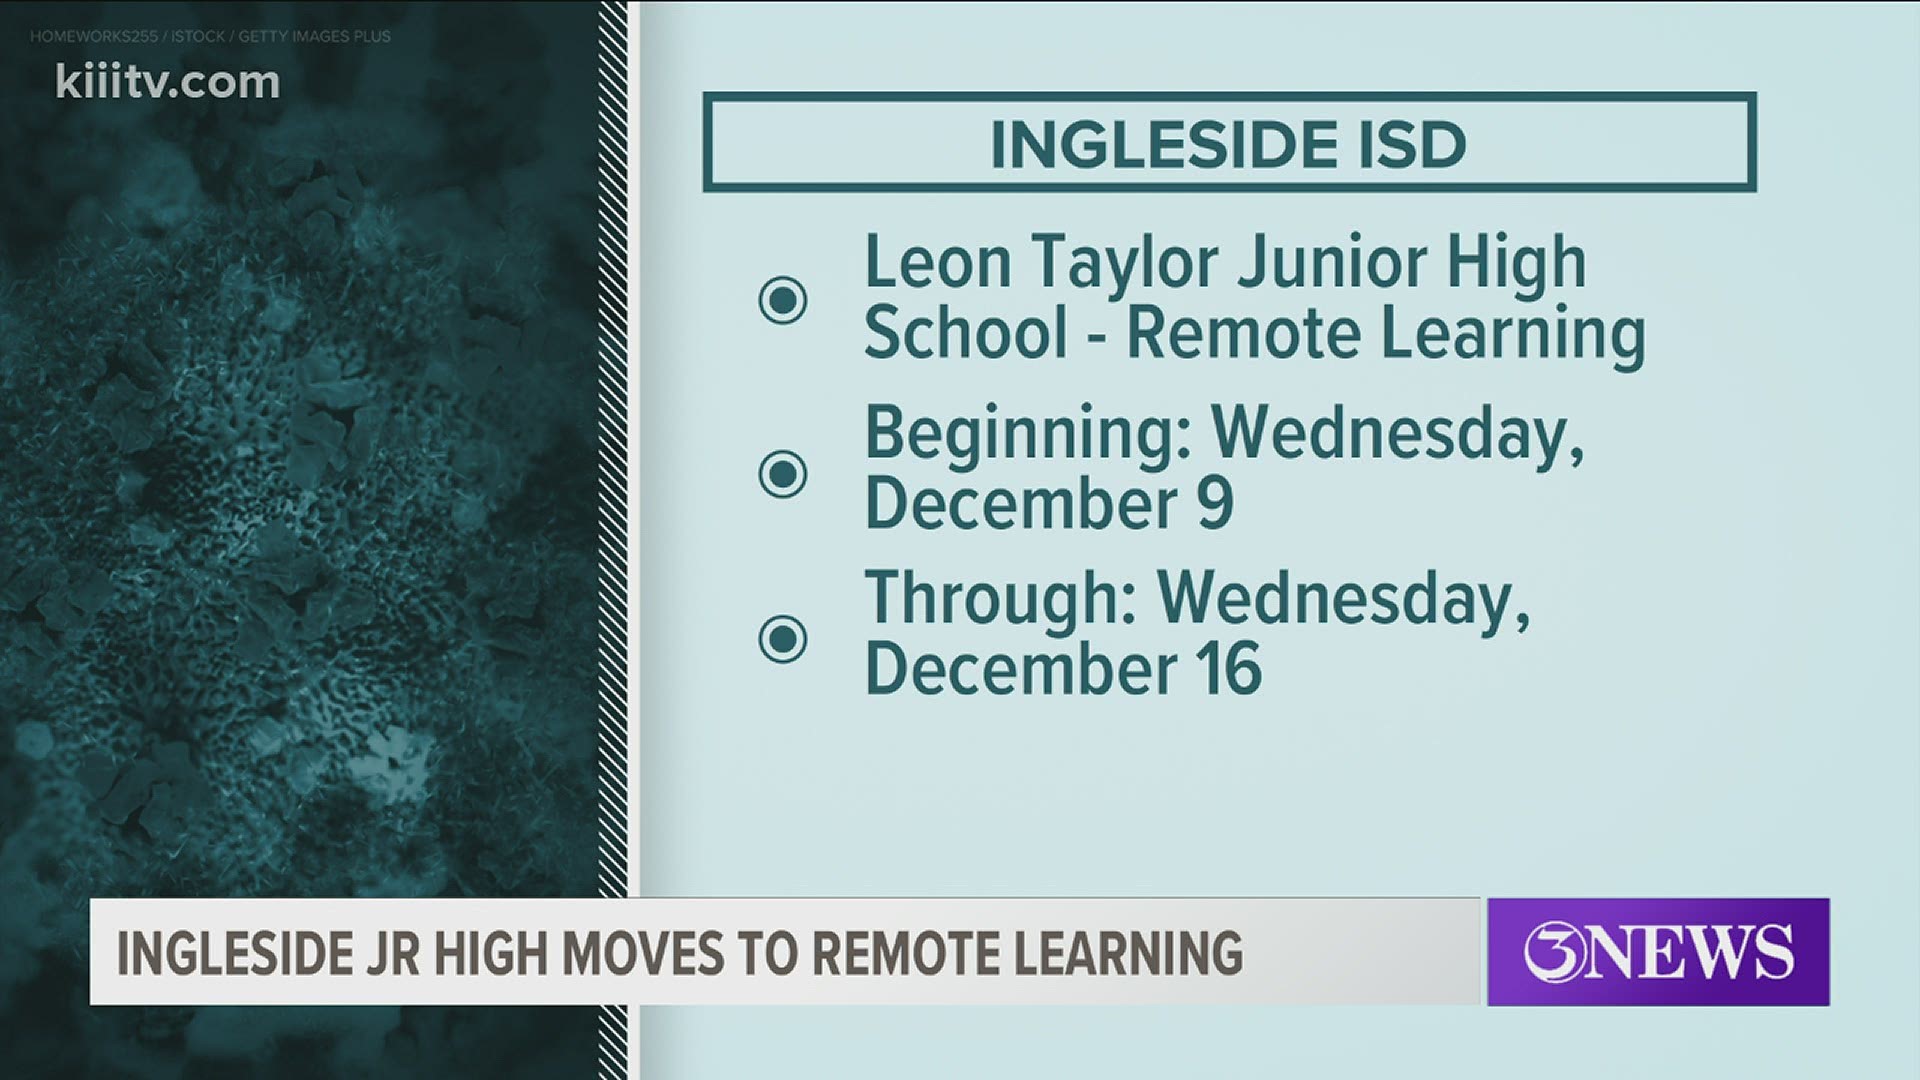 Students will begin remote learning on Wednesday, December 9. Parents, here's what you need to know.